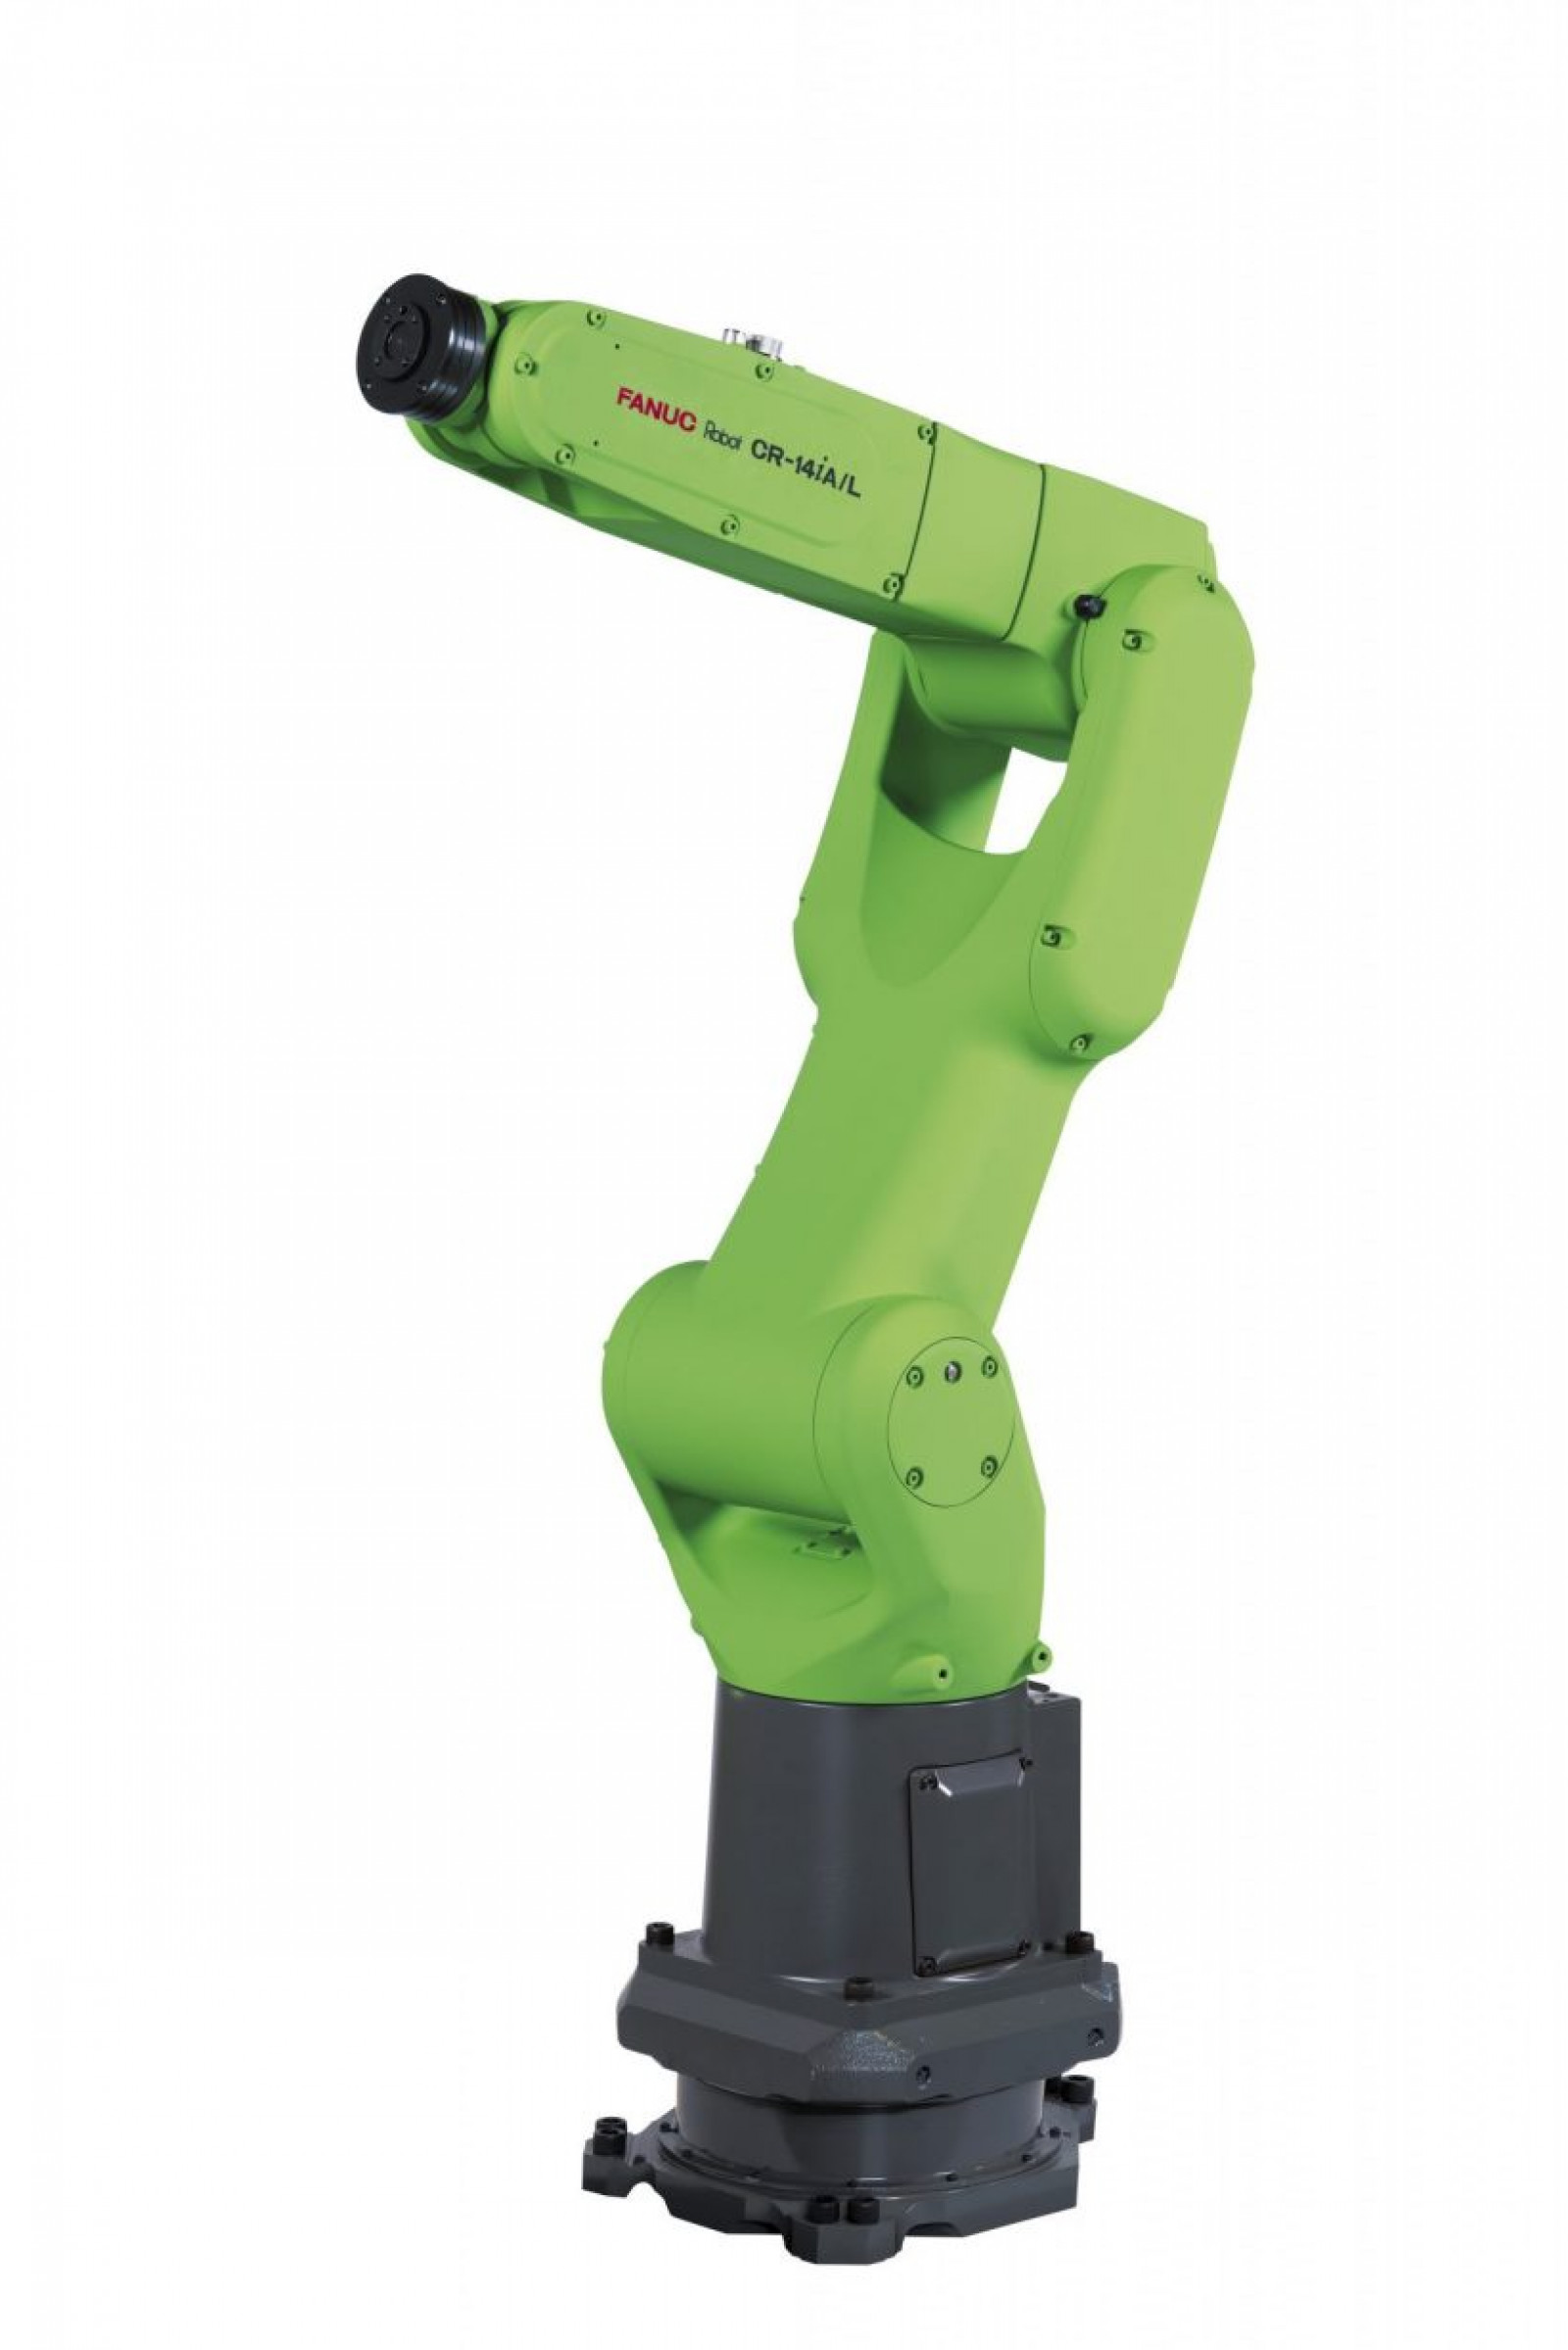 FANUC extends collaborative robot range with high-strength low-footprint addition